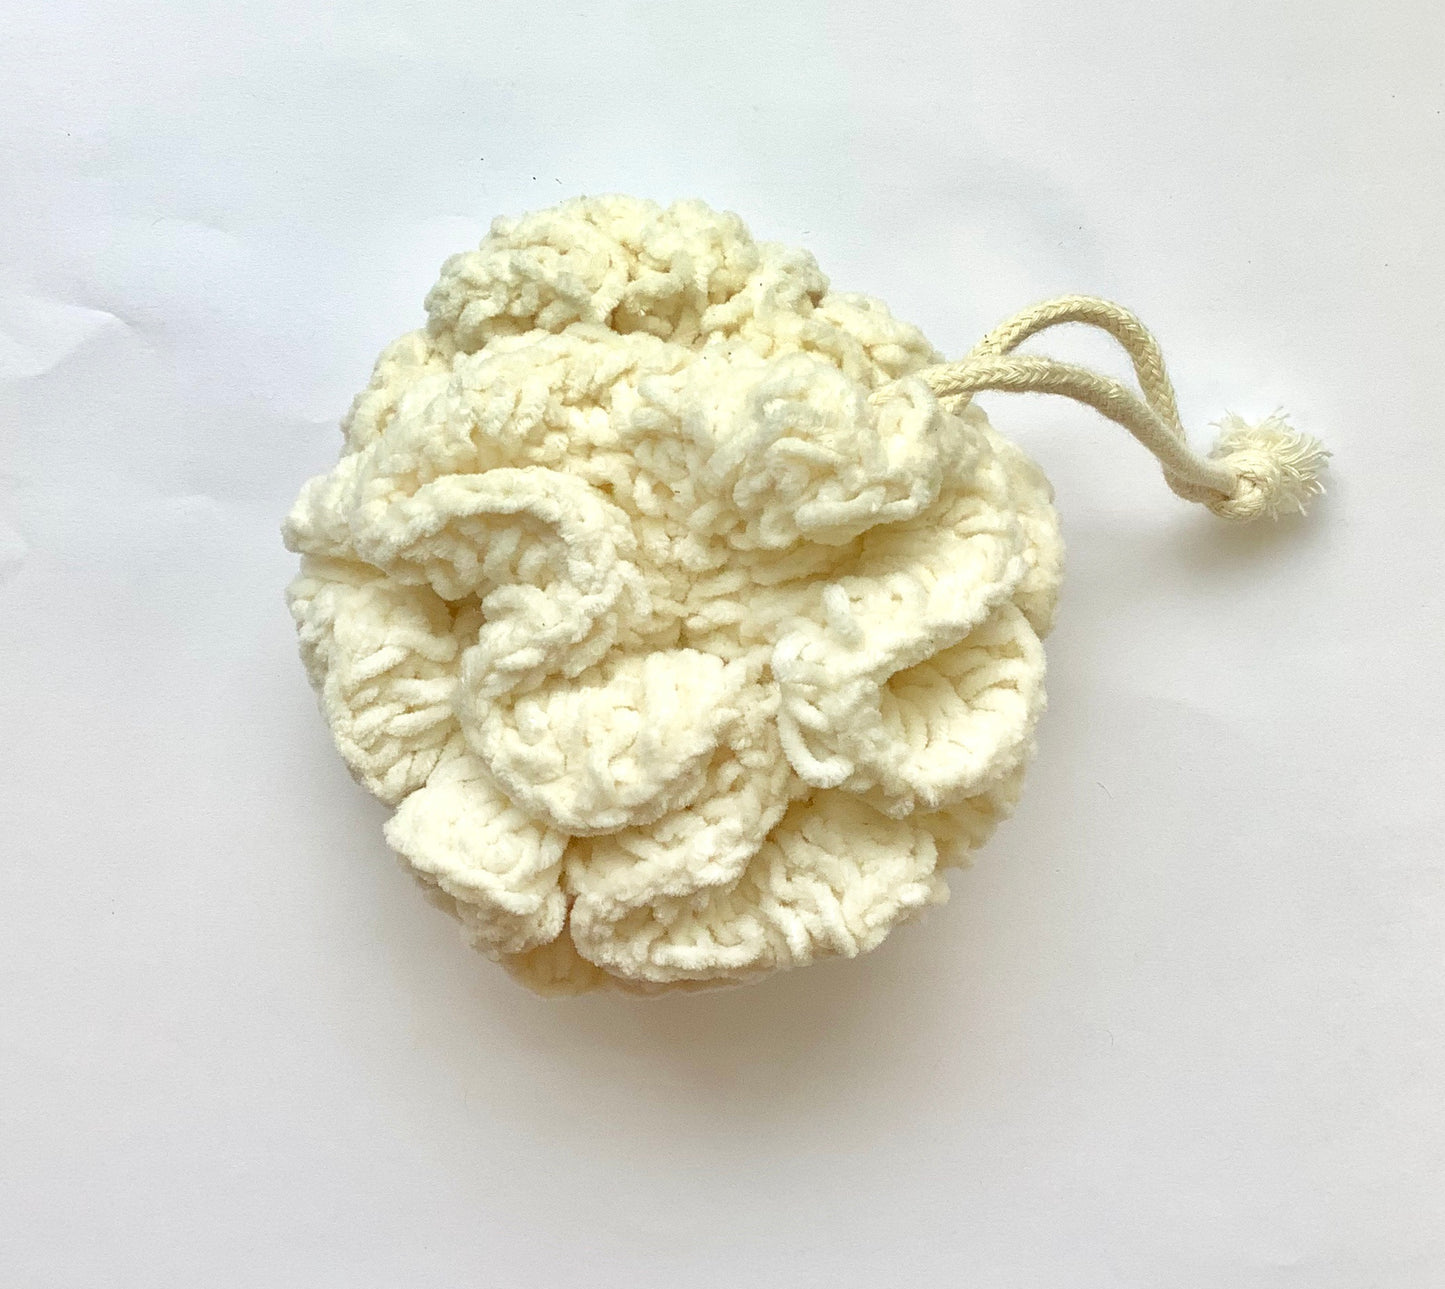 Cotton lathering poof - CakeFaceSoaping